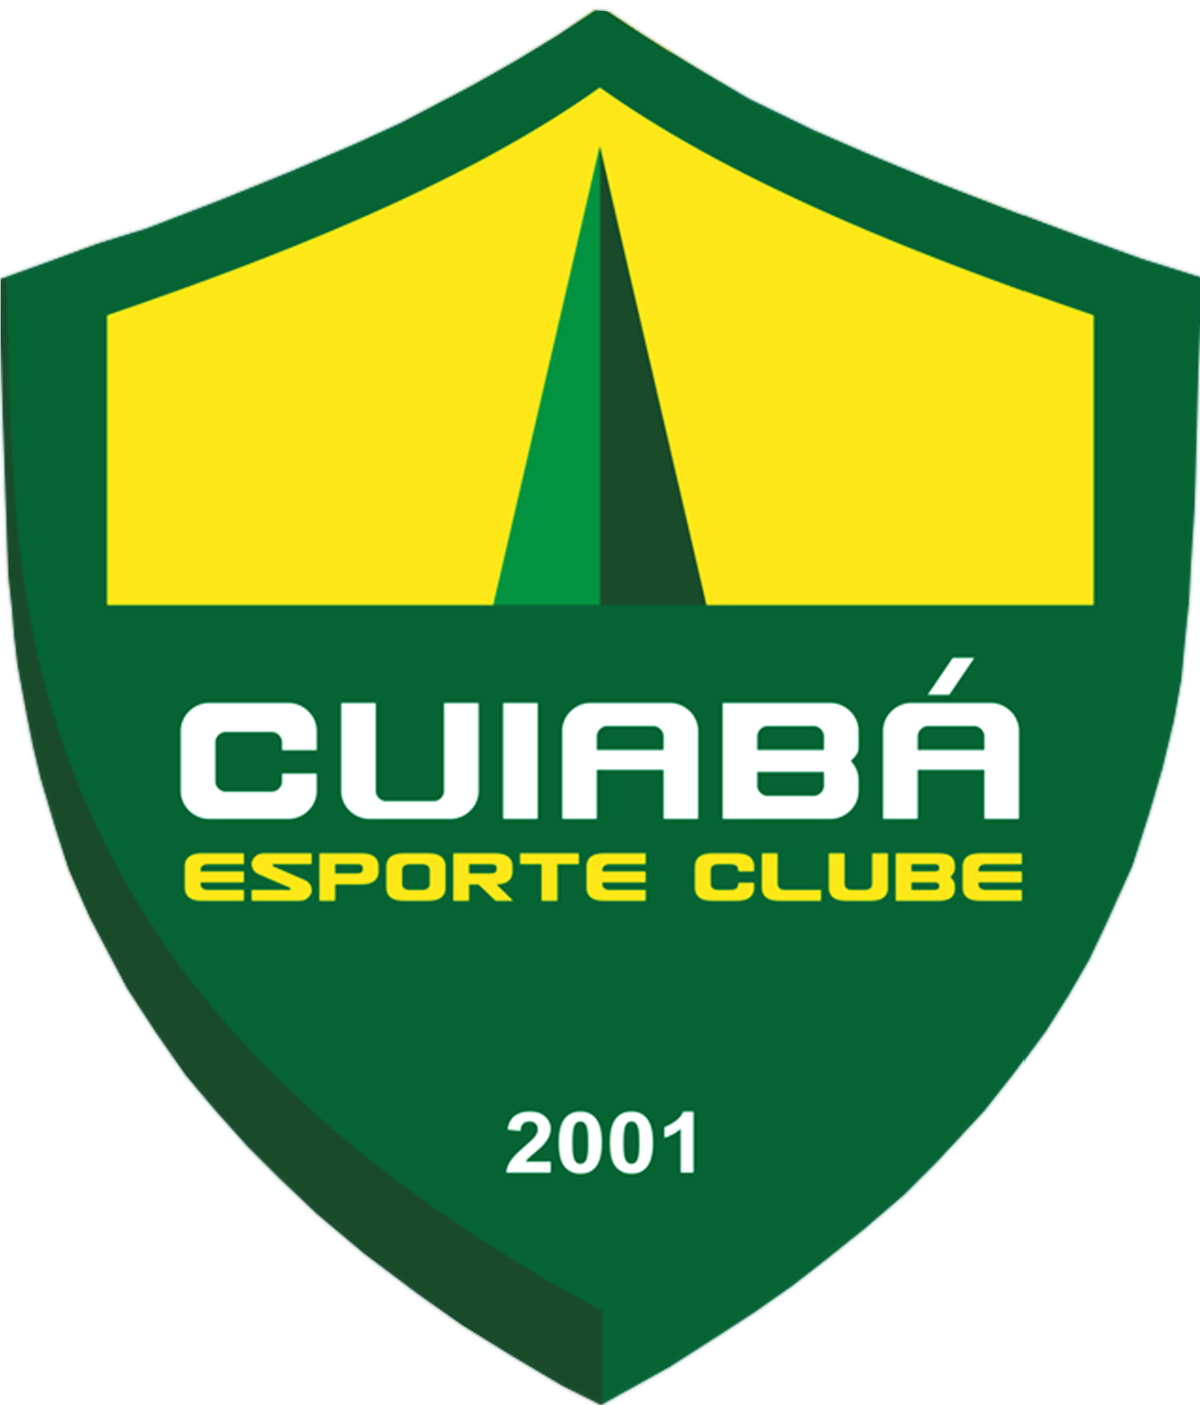 Botafogo vs Cuiabá Prediction: Leader Botafogo can take an important step towards the title